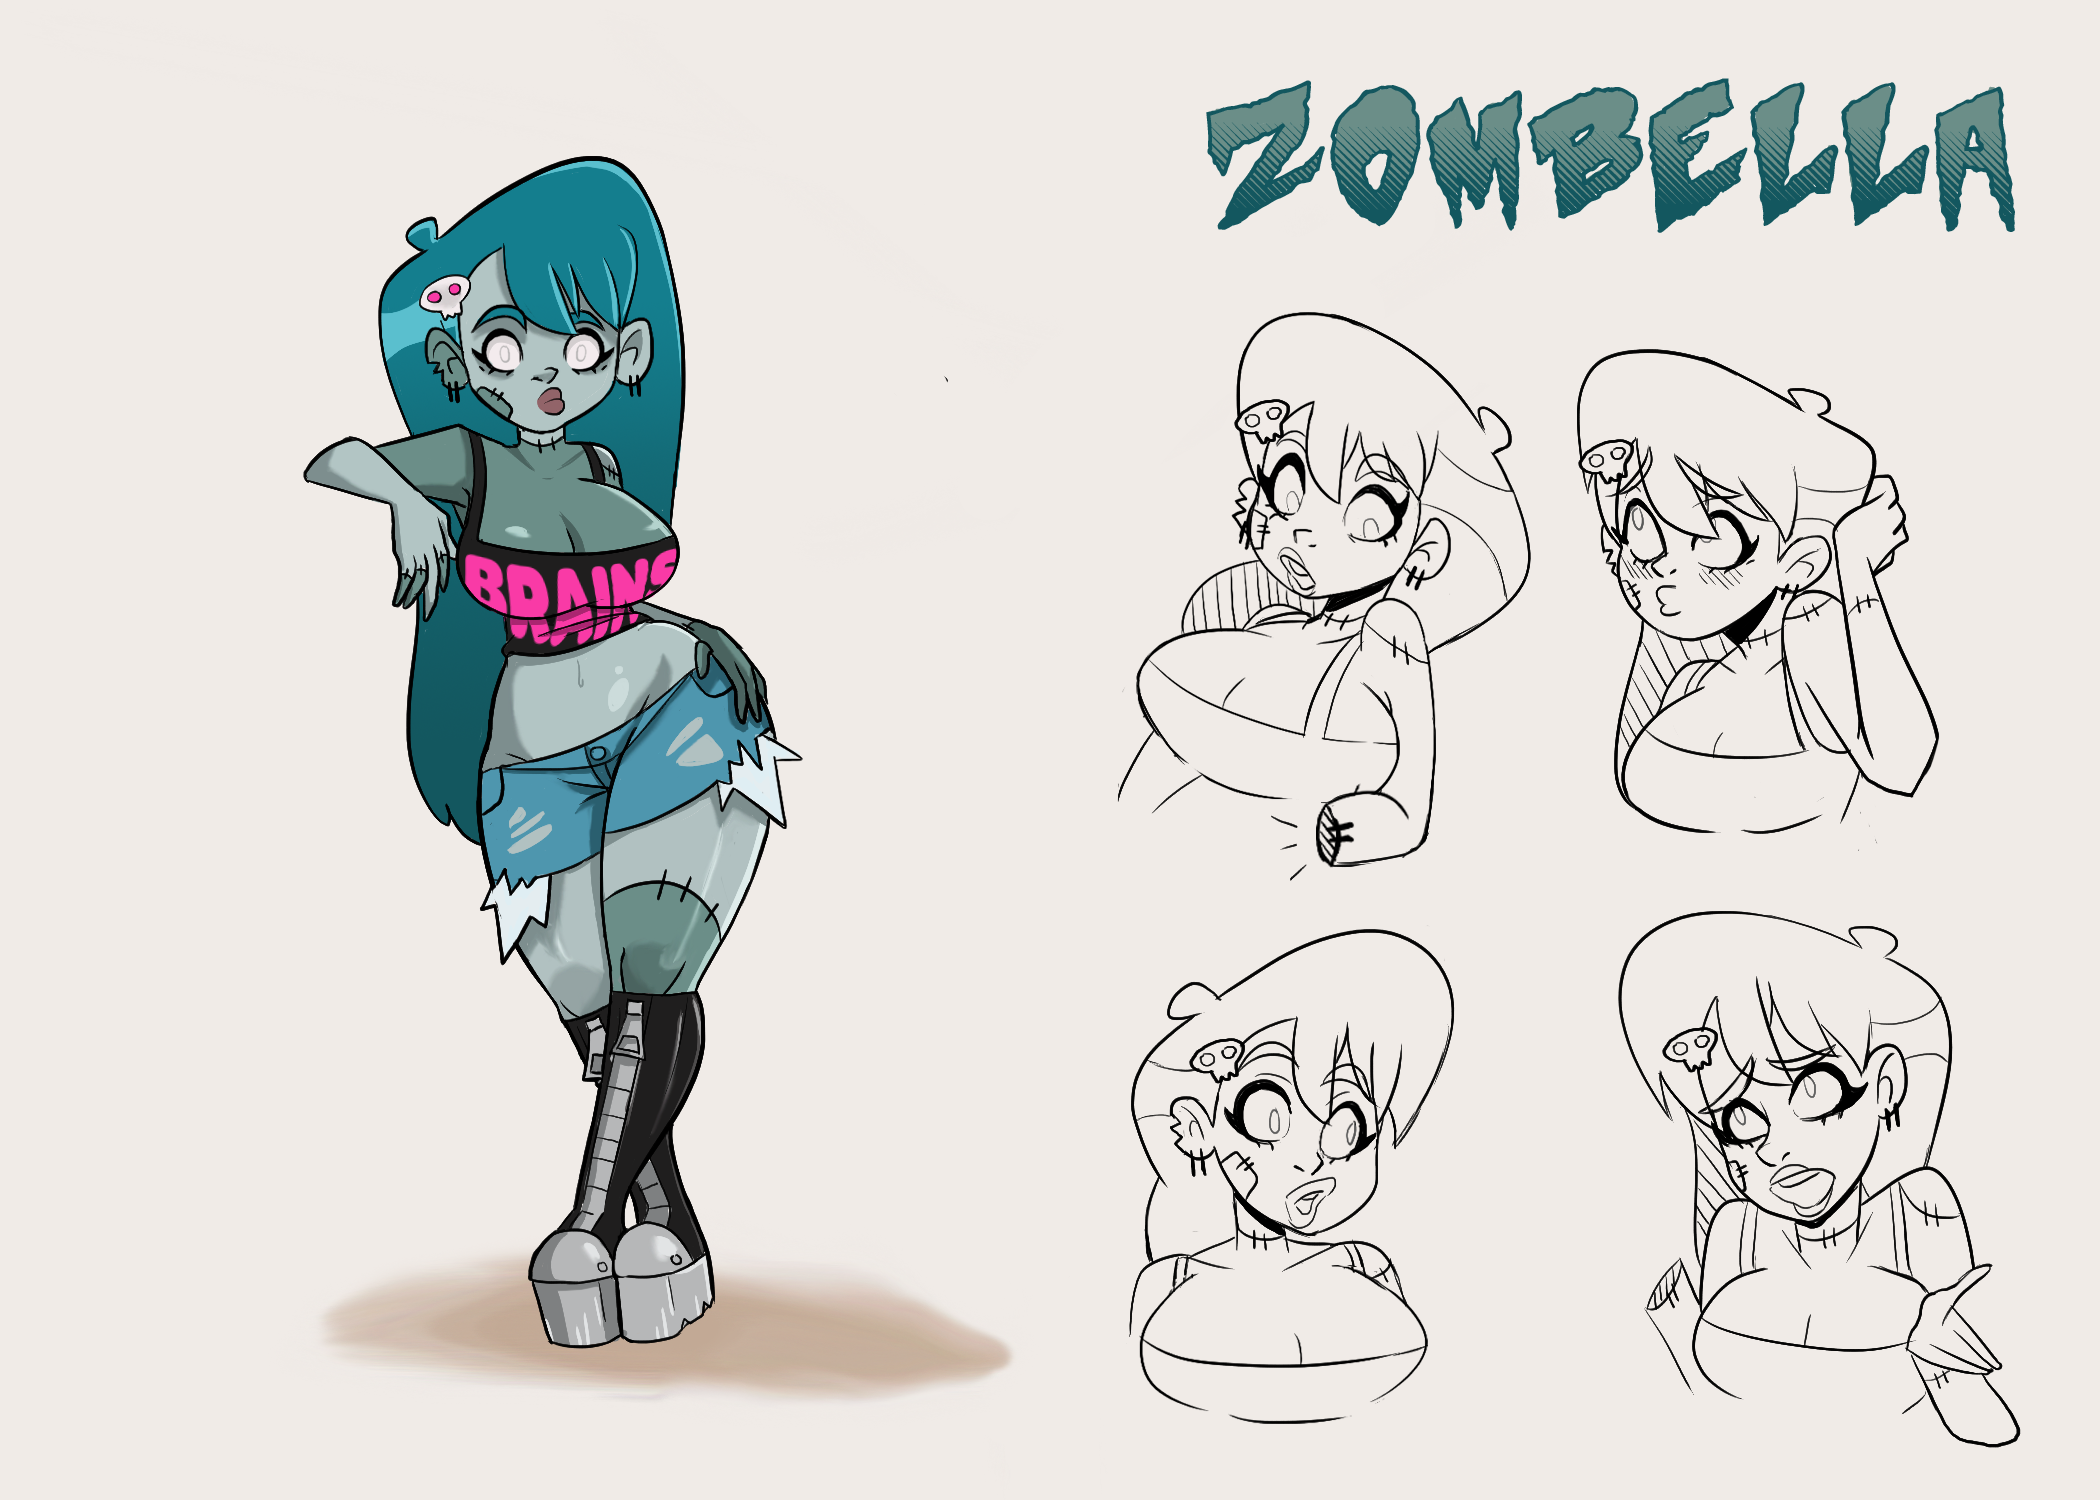  / Still of character and expressions of Zombella, the third friend amonst the group. She is a clumbsy and airheaded zombie, whose always losing her head (literally).